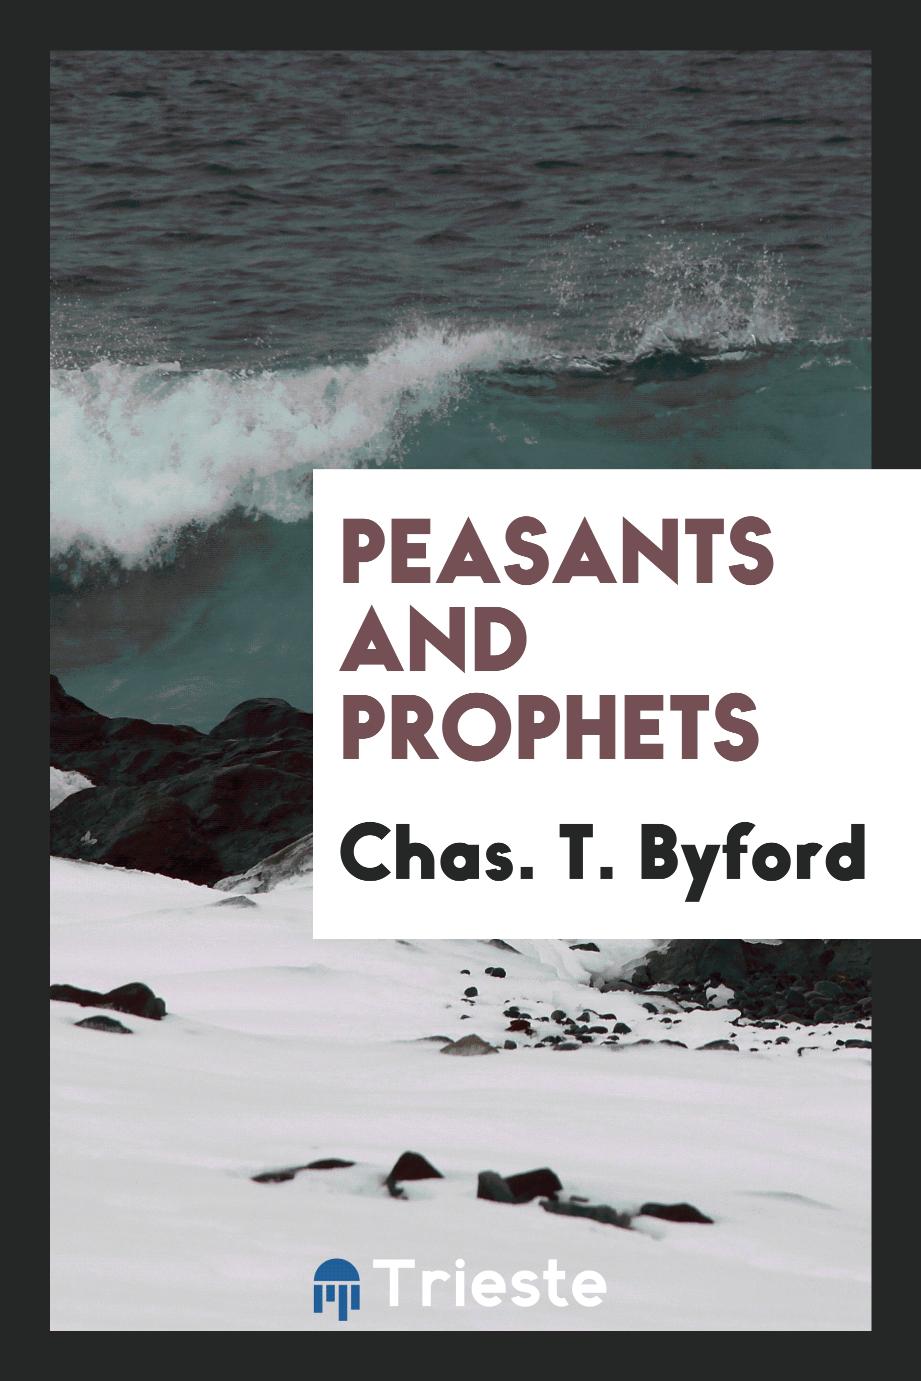 Peasants and prophets